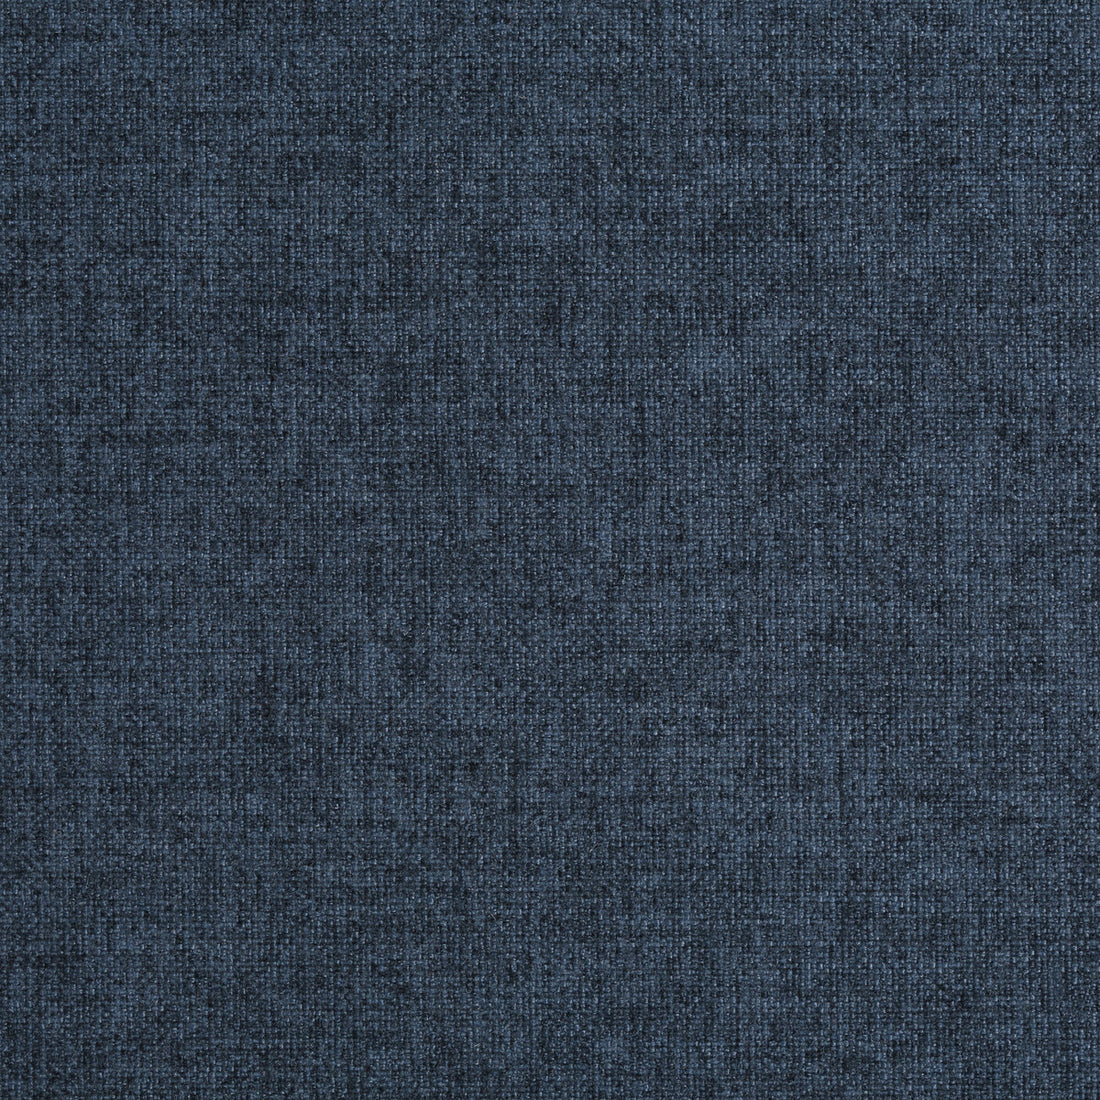 Kravet Smart fabric in 35121-5 color - pattern 35121.5.0 - by Kravet Smart in the Performance Crypton Home collection